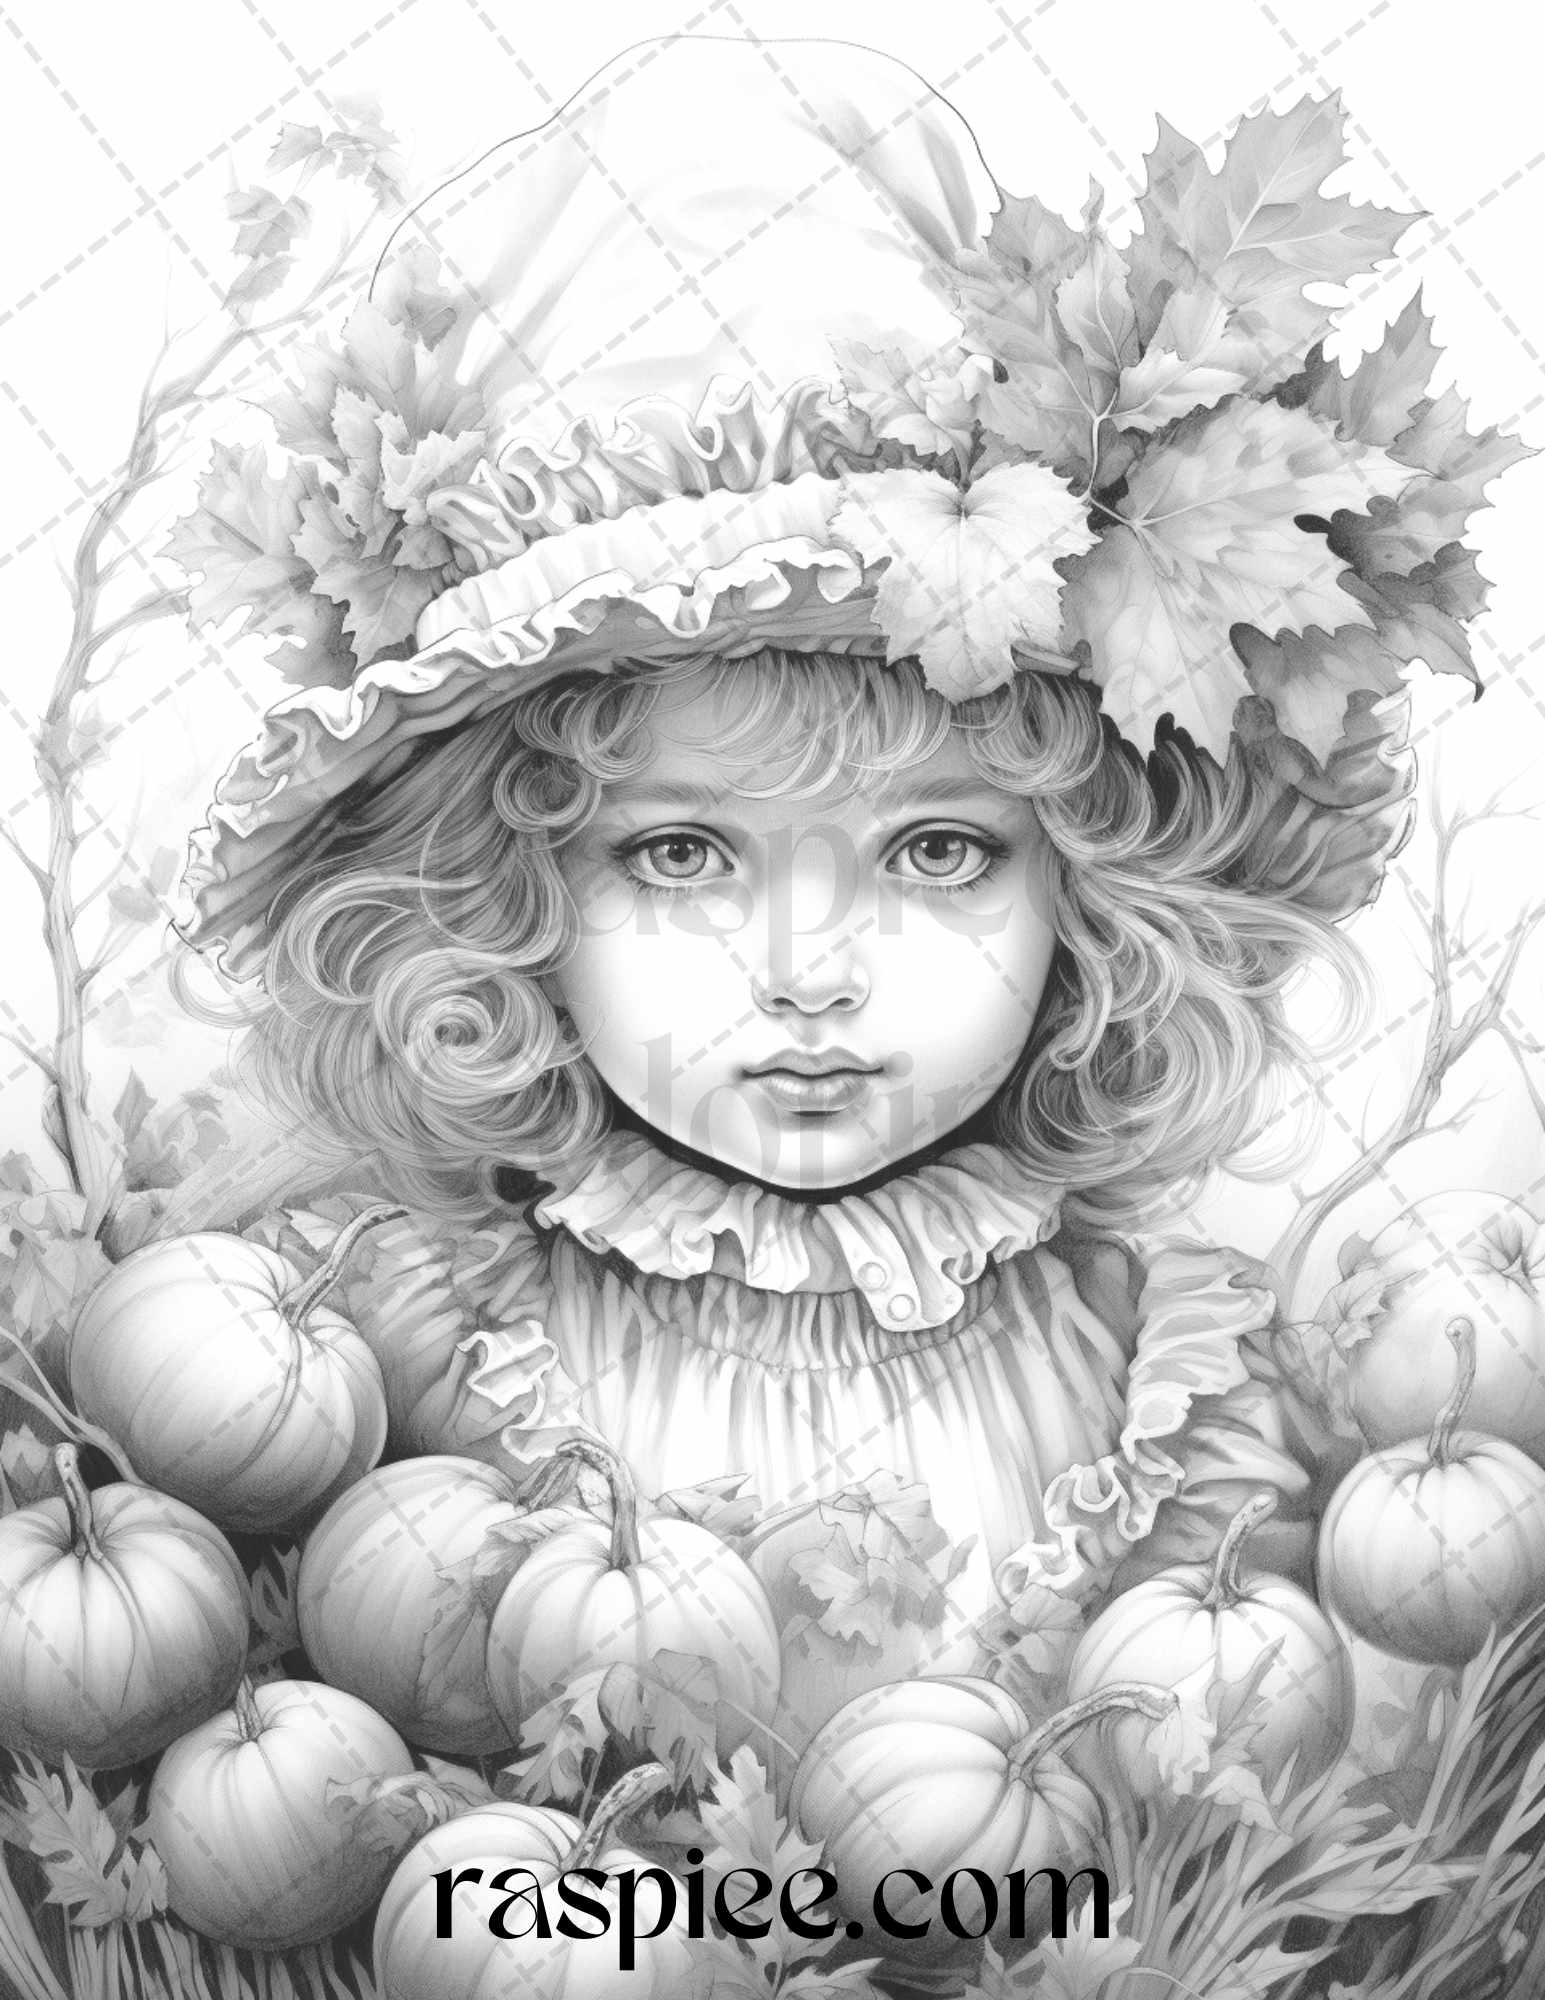 Autumn Coloring Pages for Adults, Vintage Printable Coloring Girls, Fall Coloring Sheets Bundle, Adult Coloring Book Art, Retro Coloring Pages Collection, Detailed Grayscale Coloring Prints, Relaxing Adult Coloring Activities